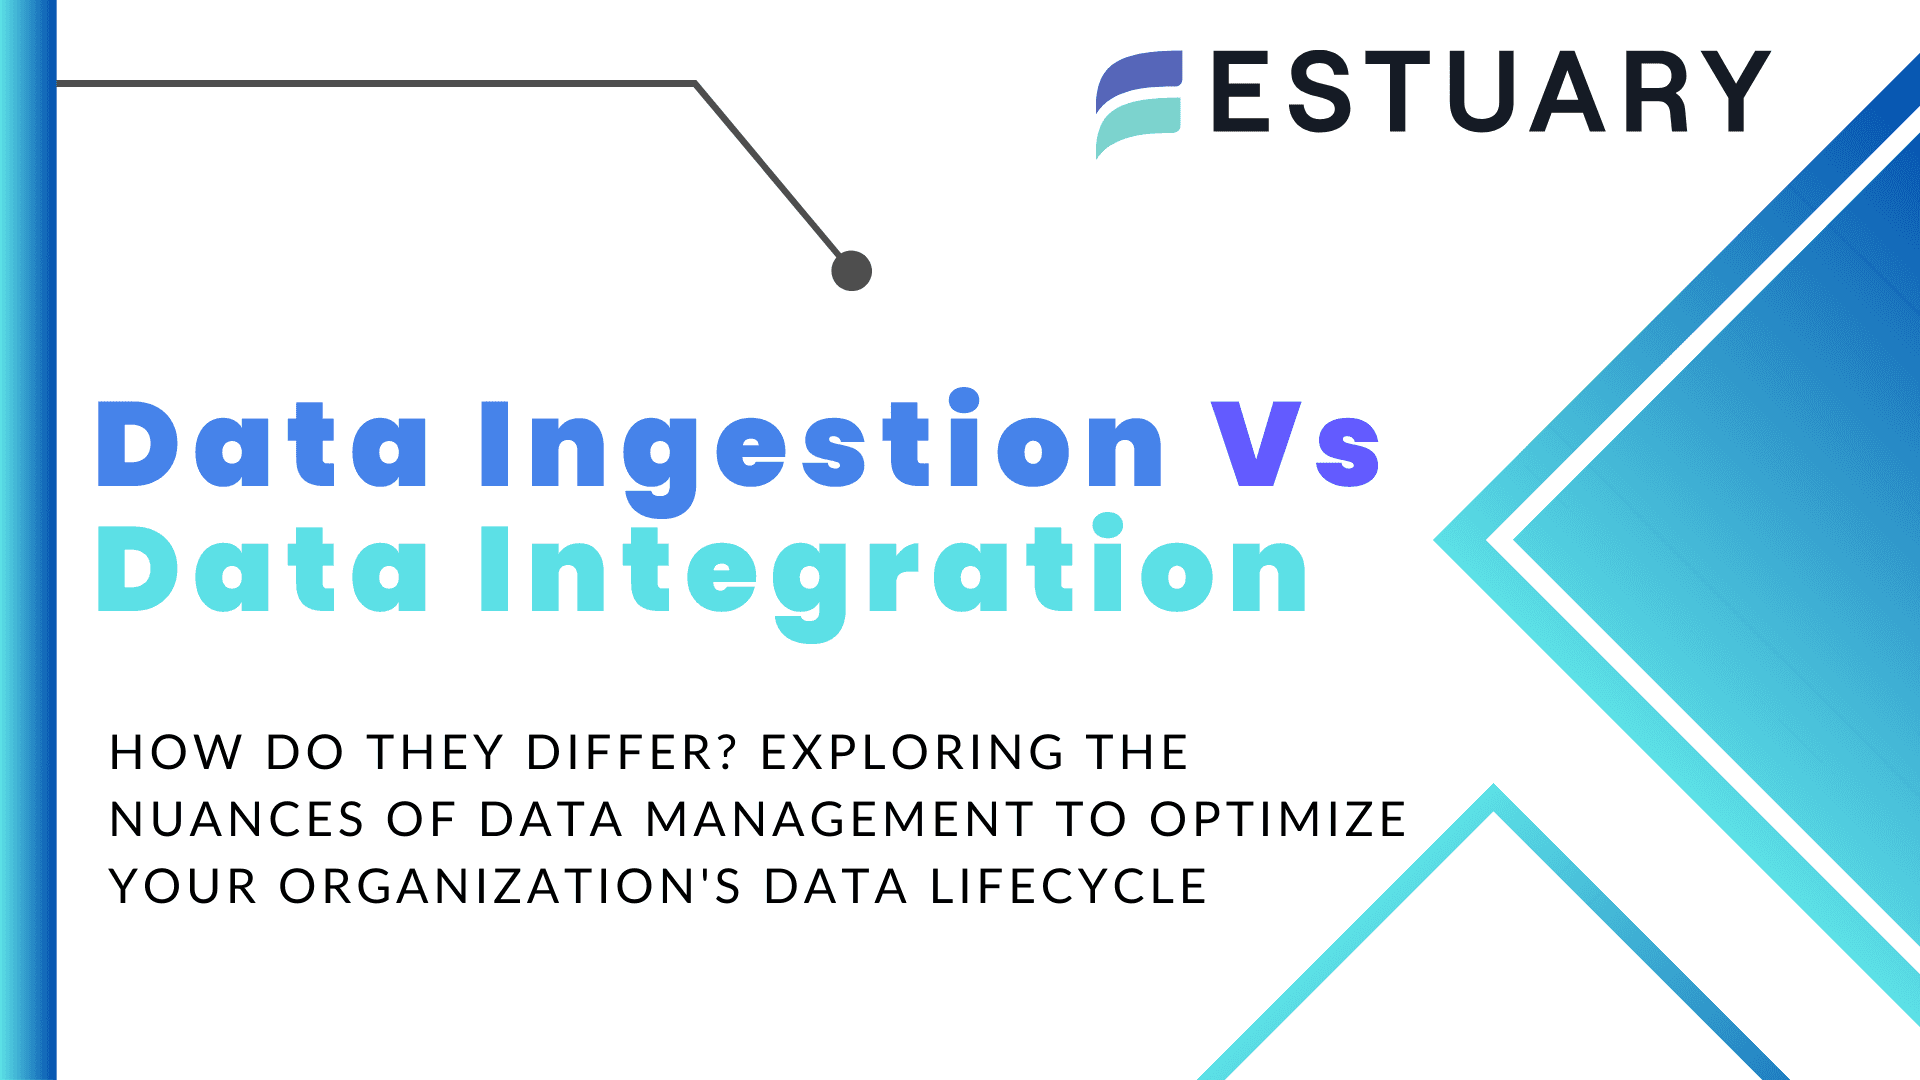 Data Ingestion vs Data Integration: How Do They Differ?